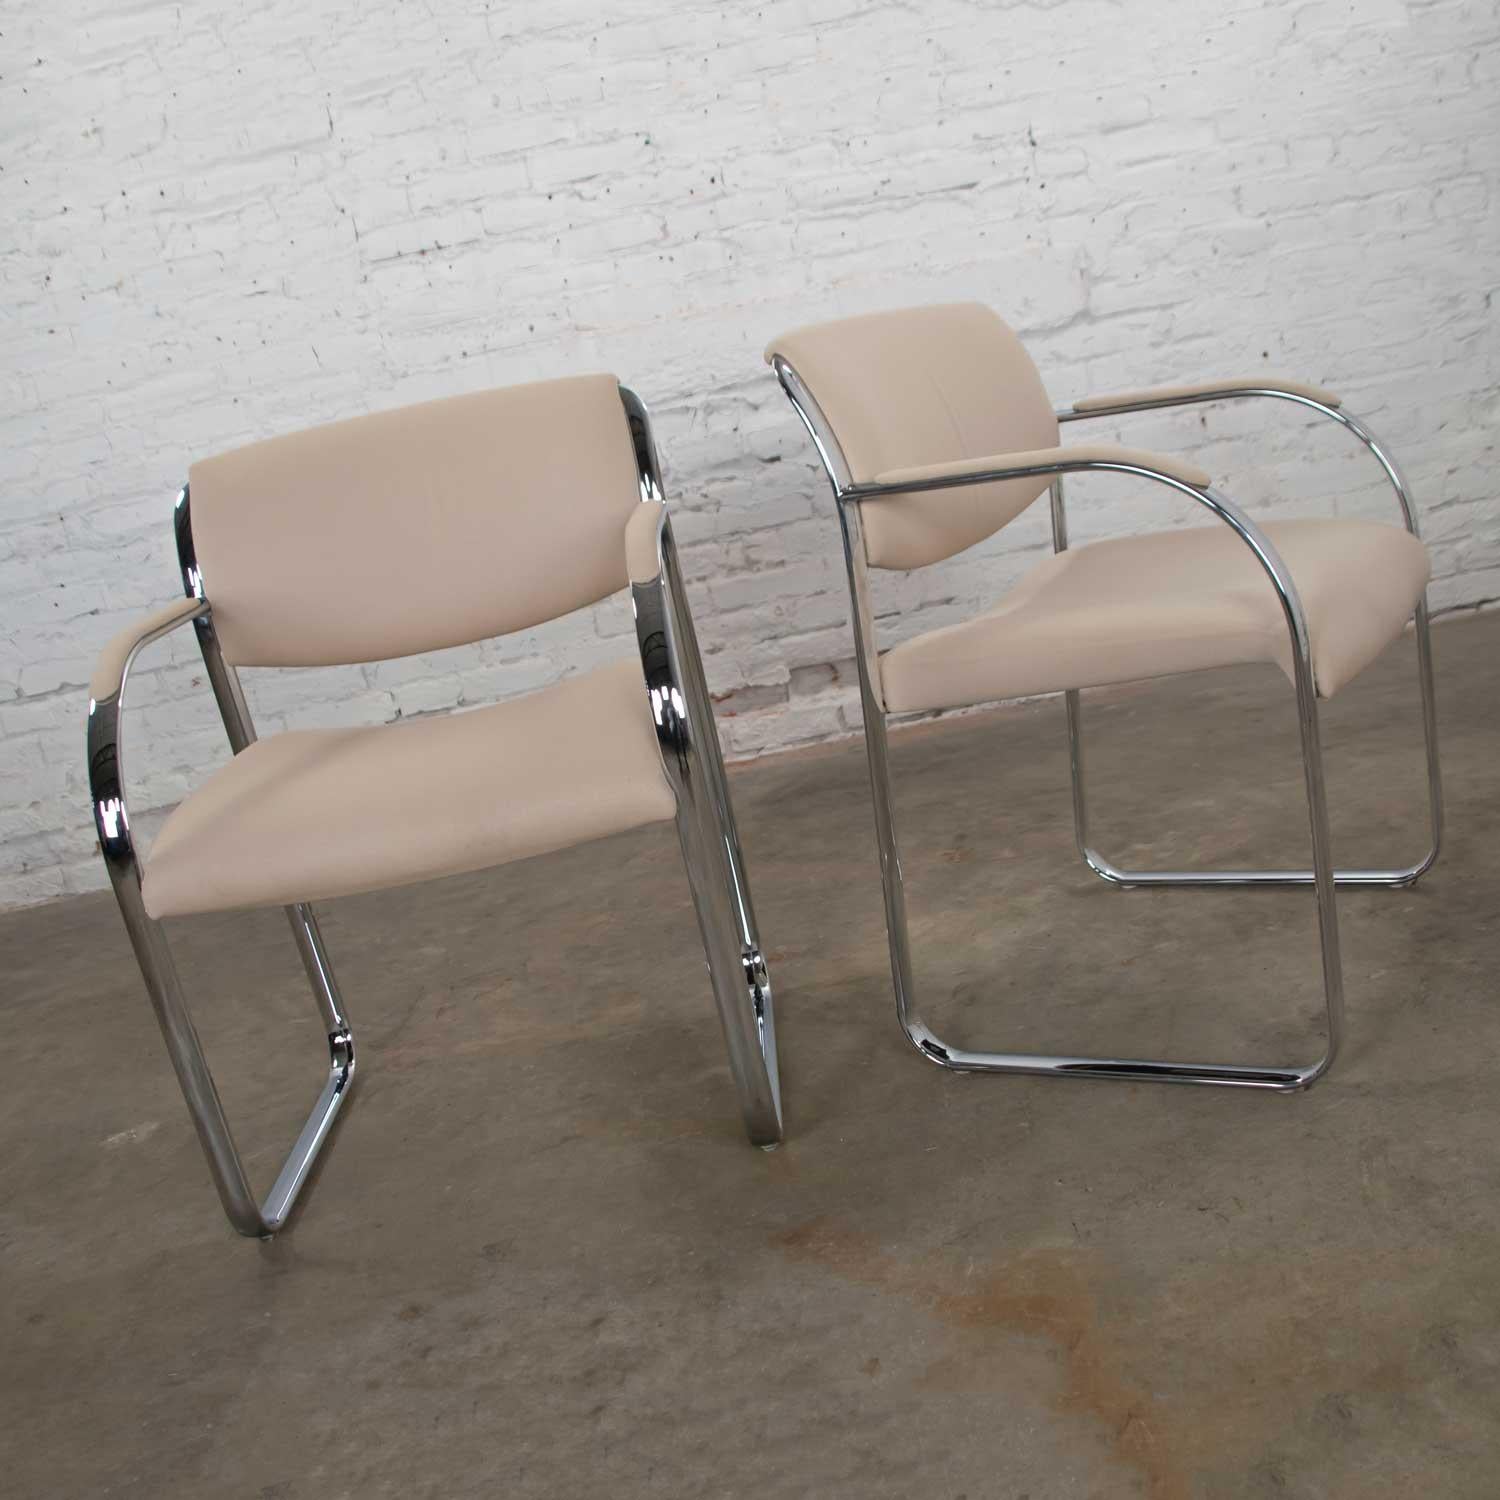 Handsome pair of modern chrome accent or dining armchairs with an off-white gaberdine-like fabric upholstery. They are in wonderful original condition. The chrome has been cleaned and polished and is gleaming. The fabric is in awesome condition. The